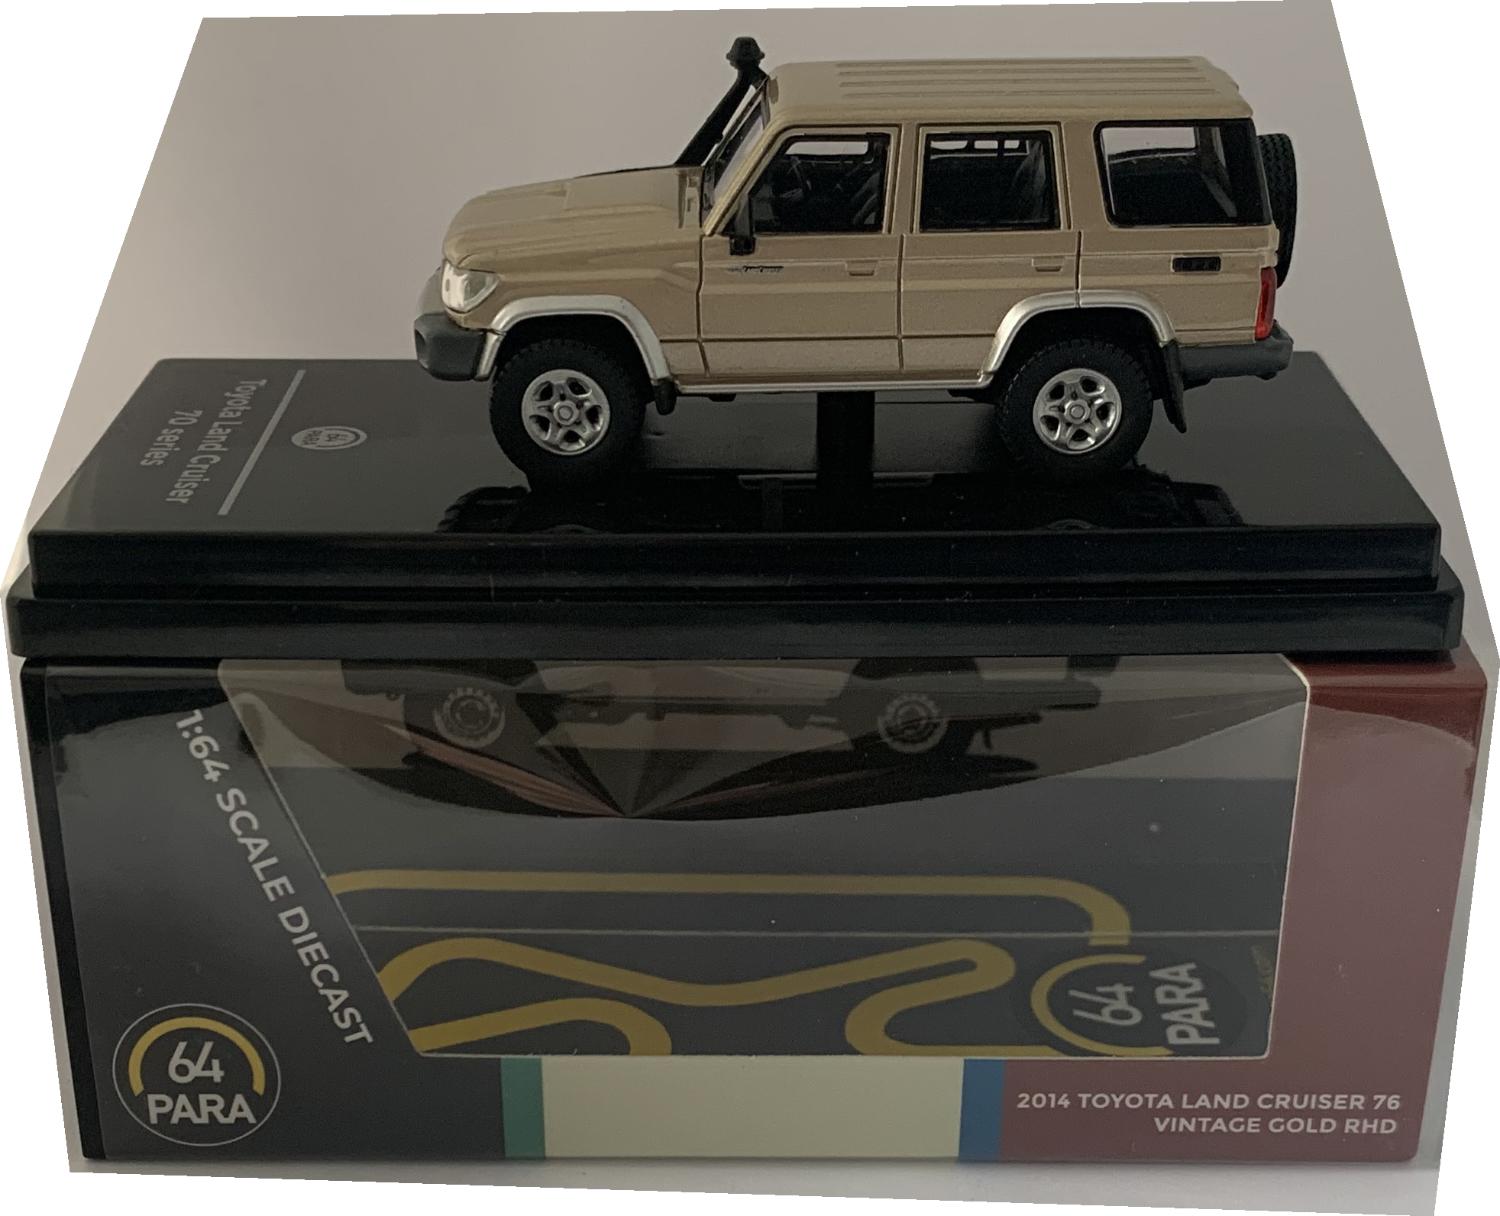 A good reproduction of the Toyota Land Cruiser mounted on a removable plinth and a removable hard plastic cover